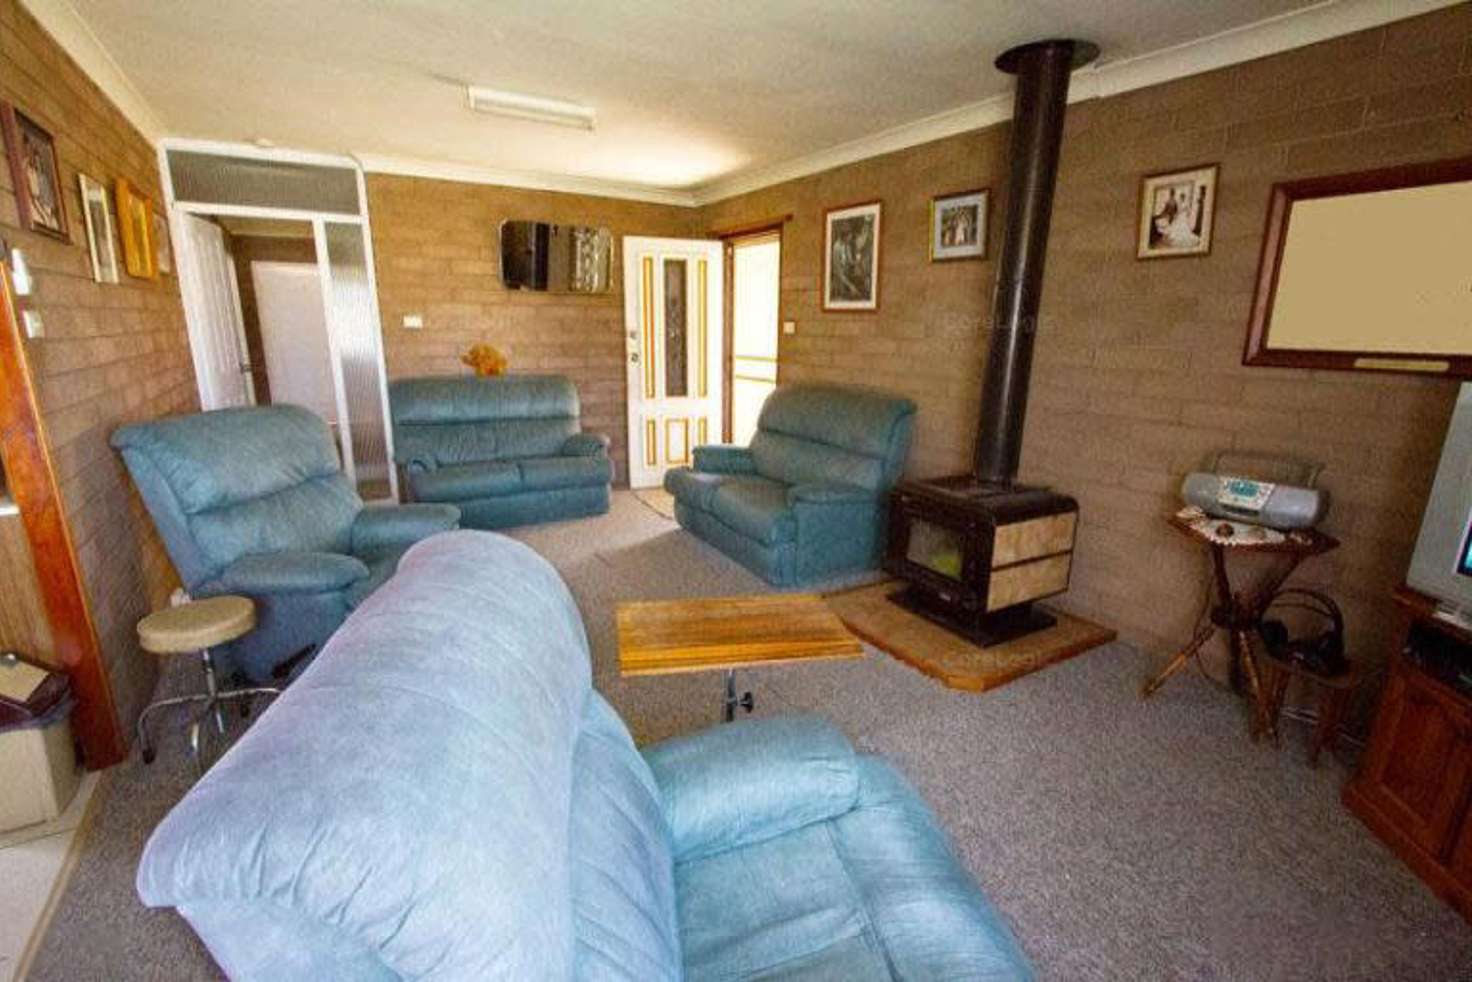 Main view of Homely house listing, 127 Adams, Wentworth NSW 2648